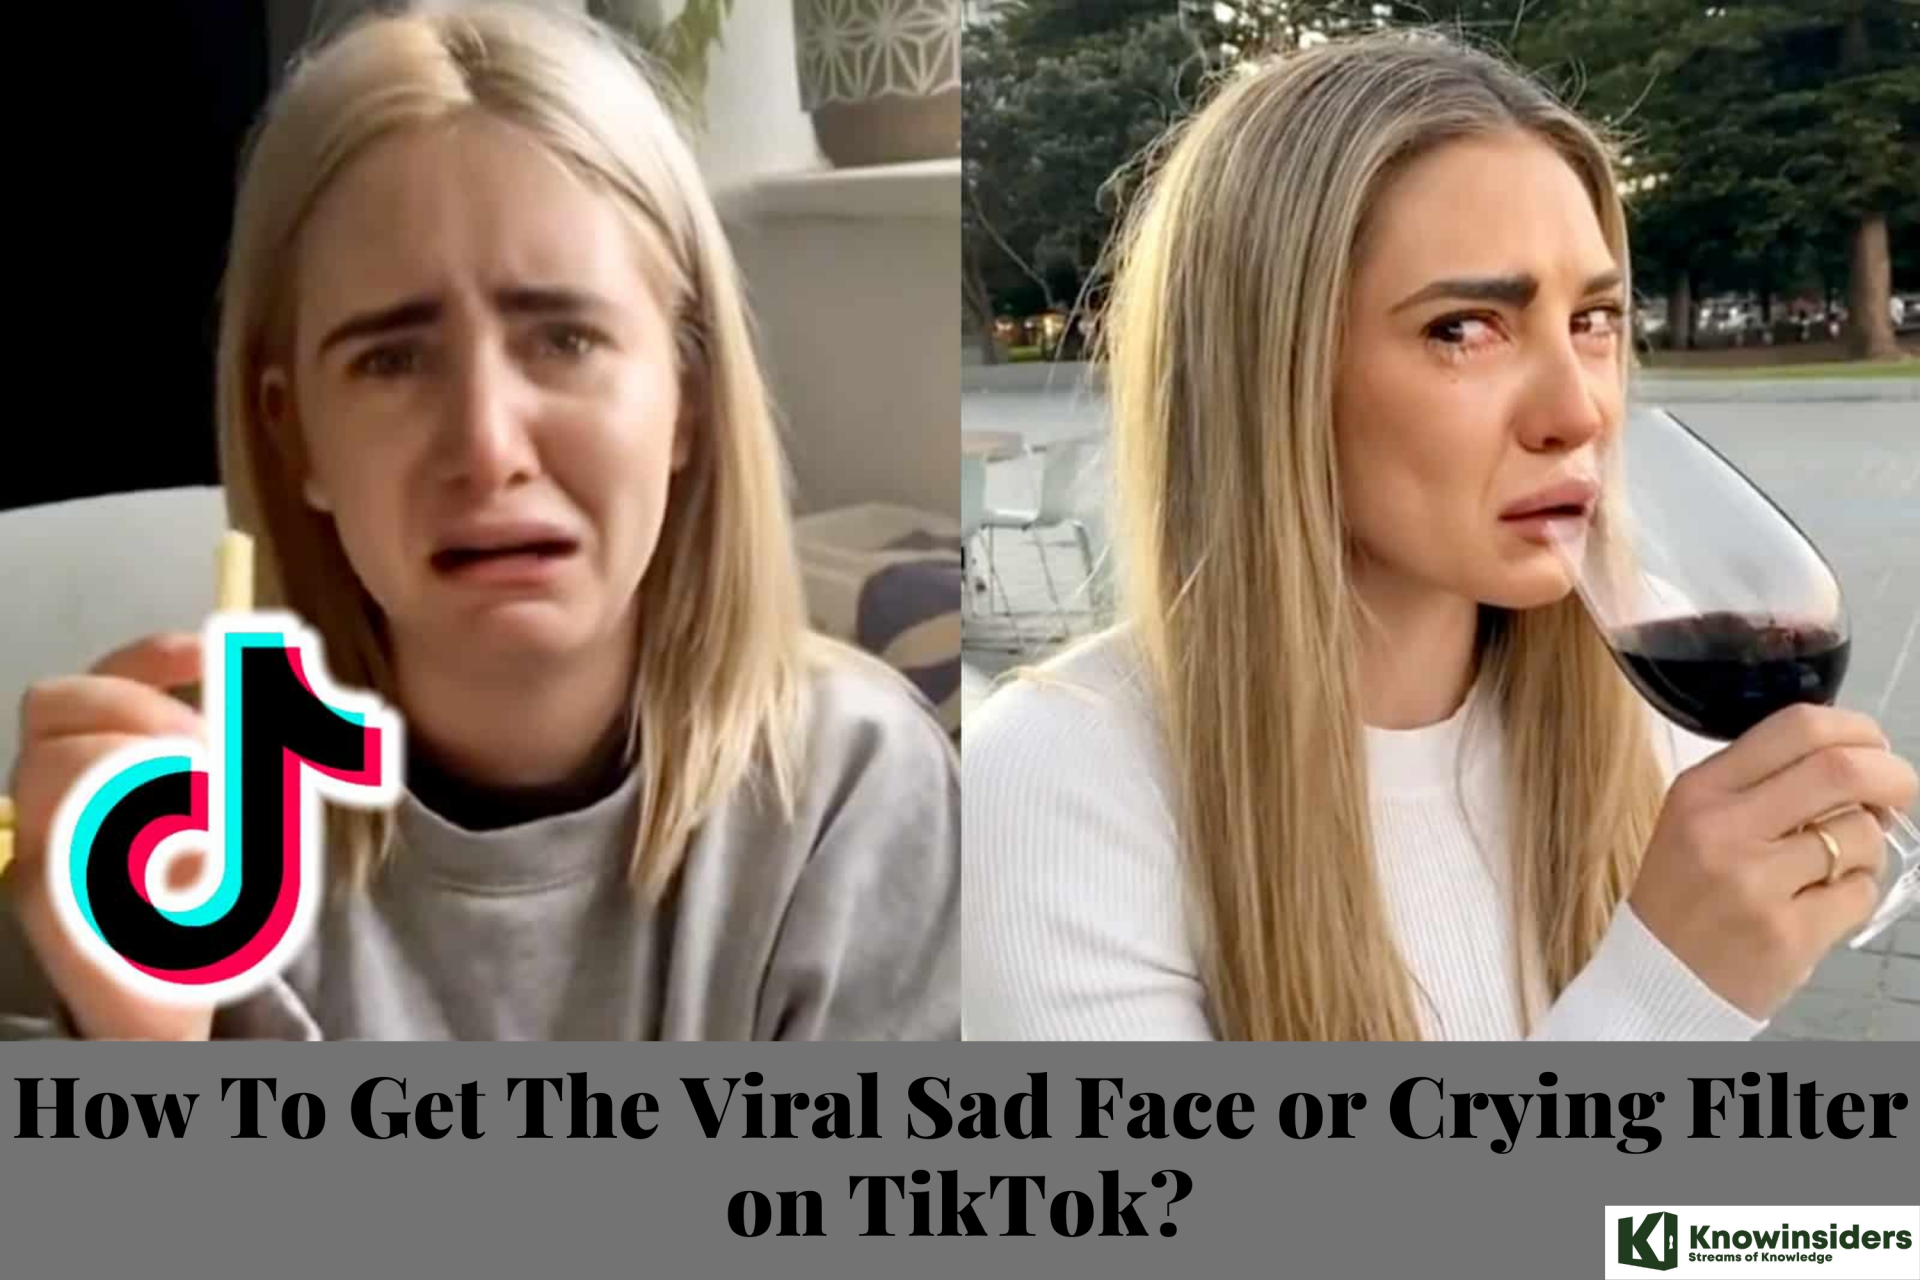 How To Get The Viral Sad Face or Crying Filter on TikTok?